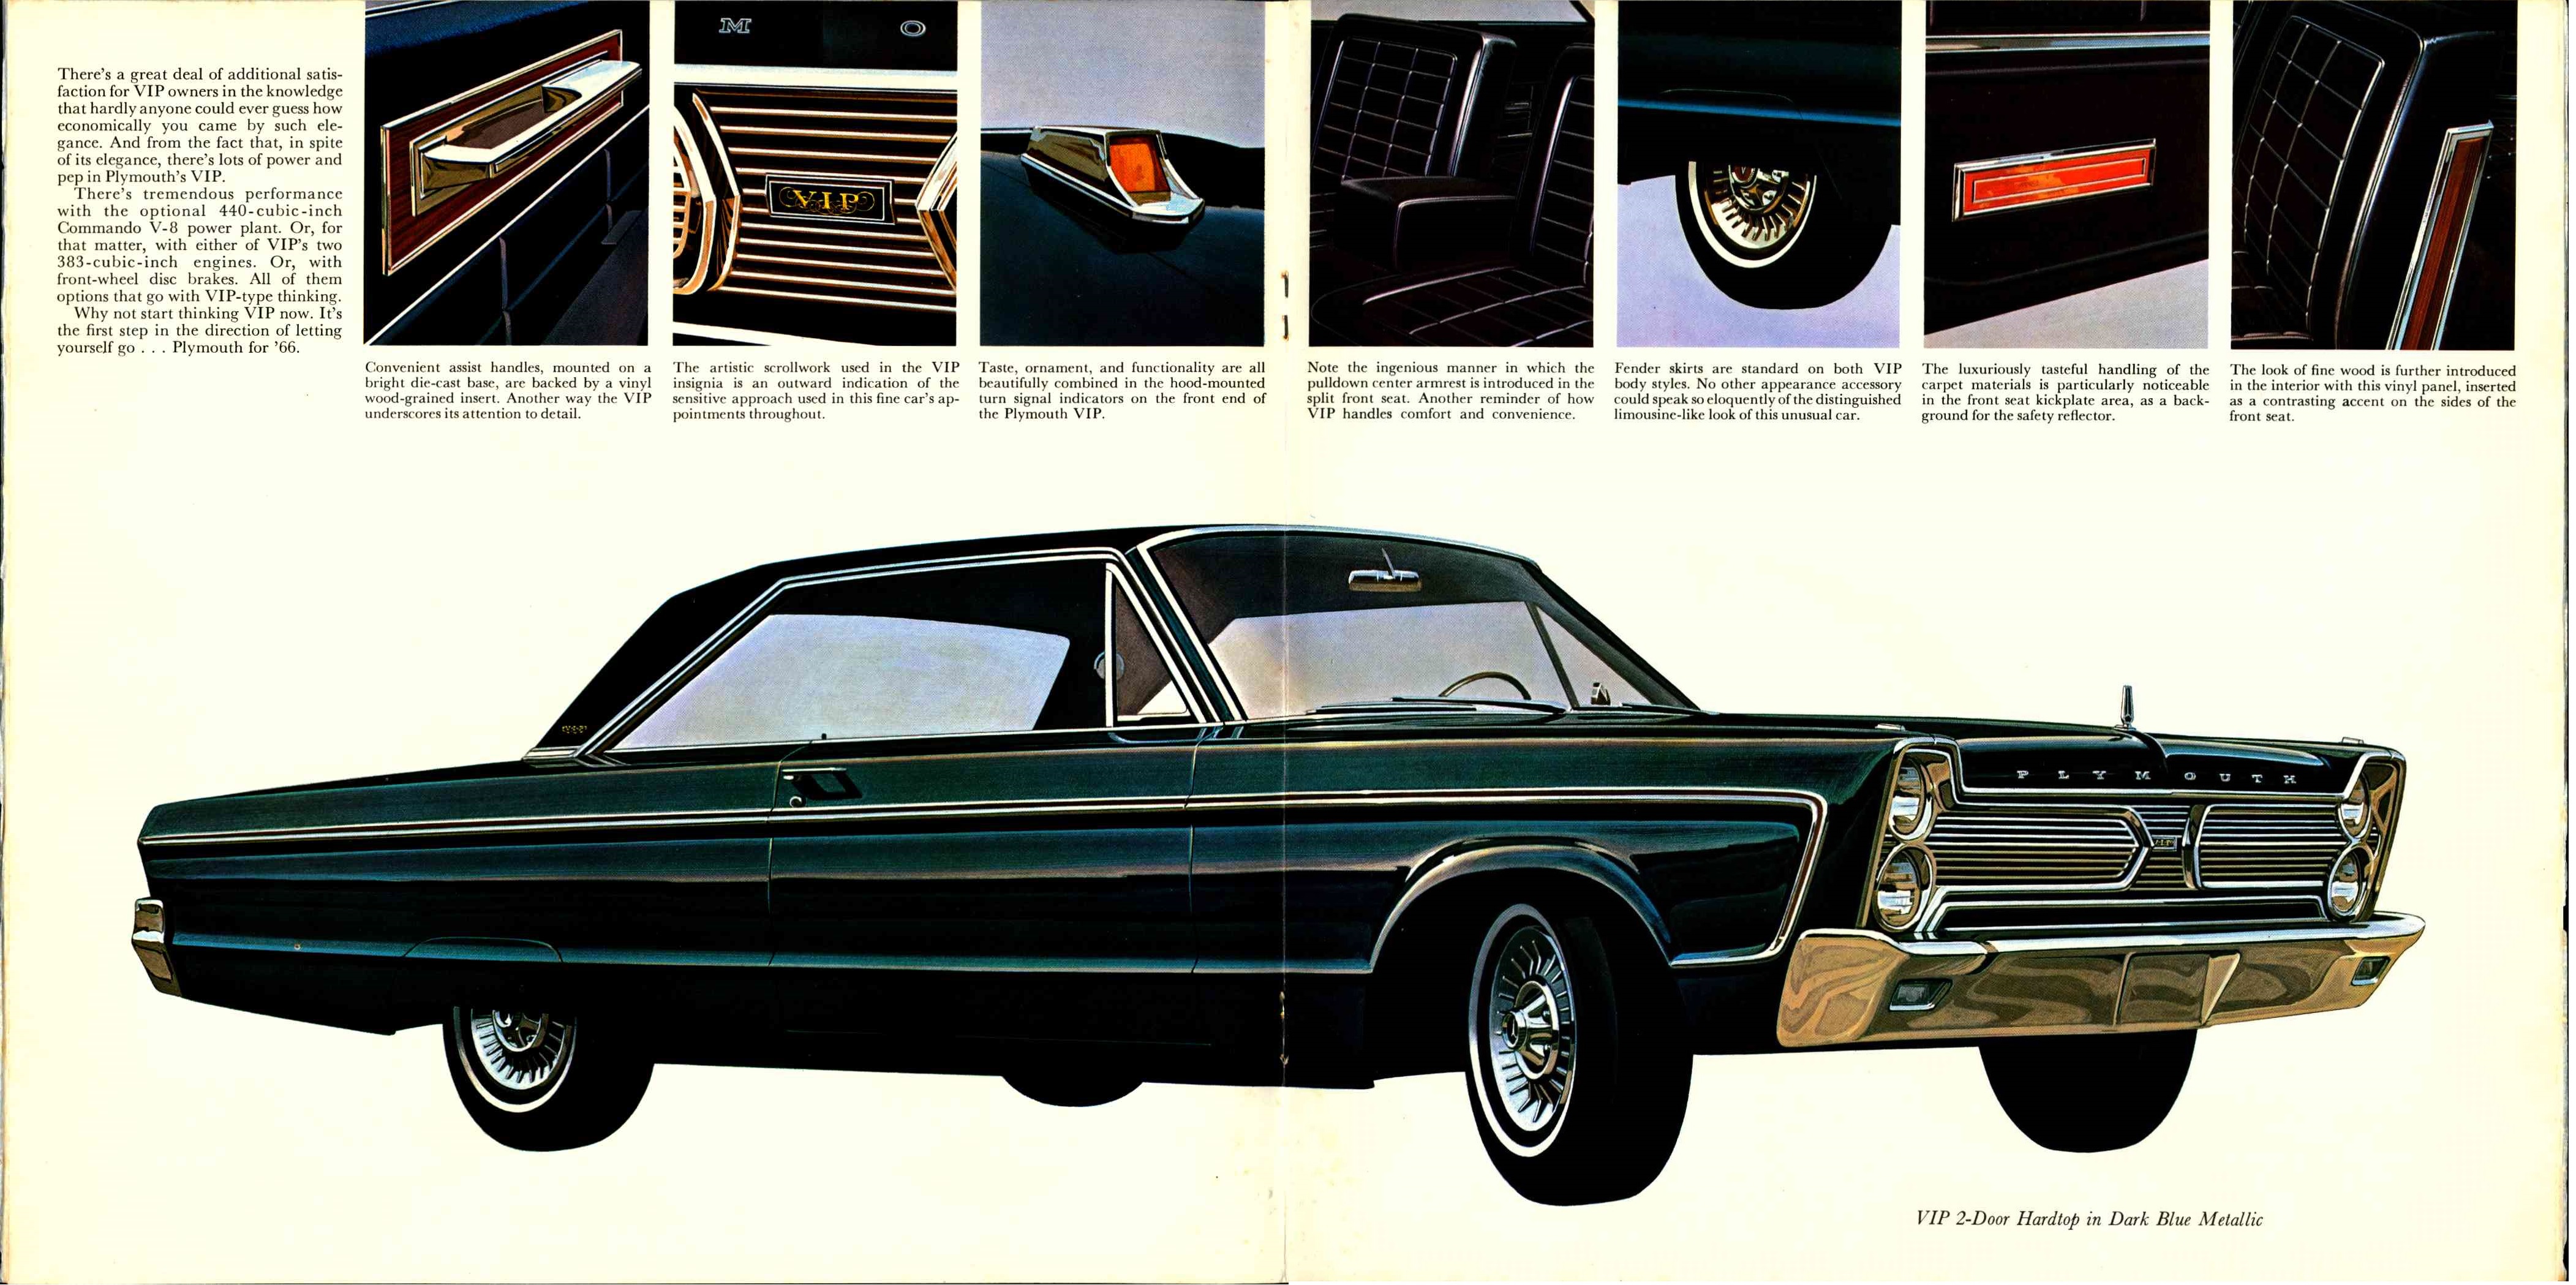 1966 Plymouth VIP Revised  06-07